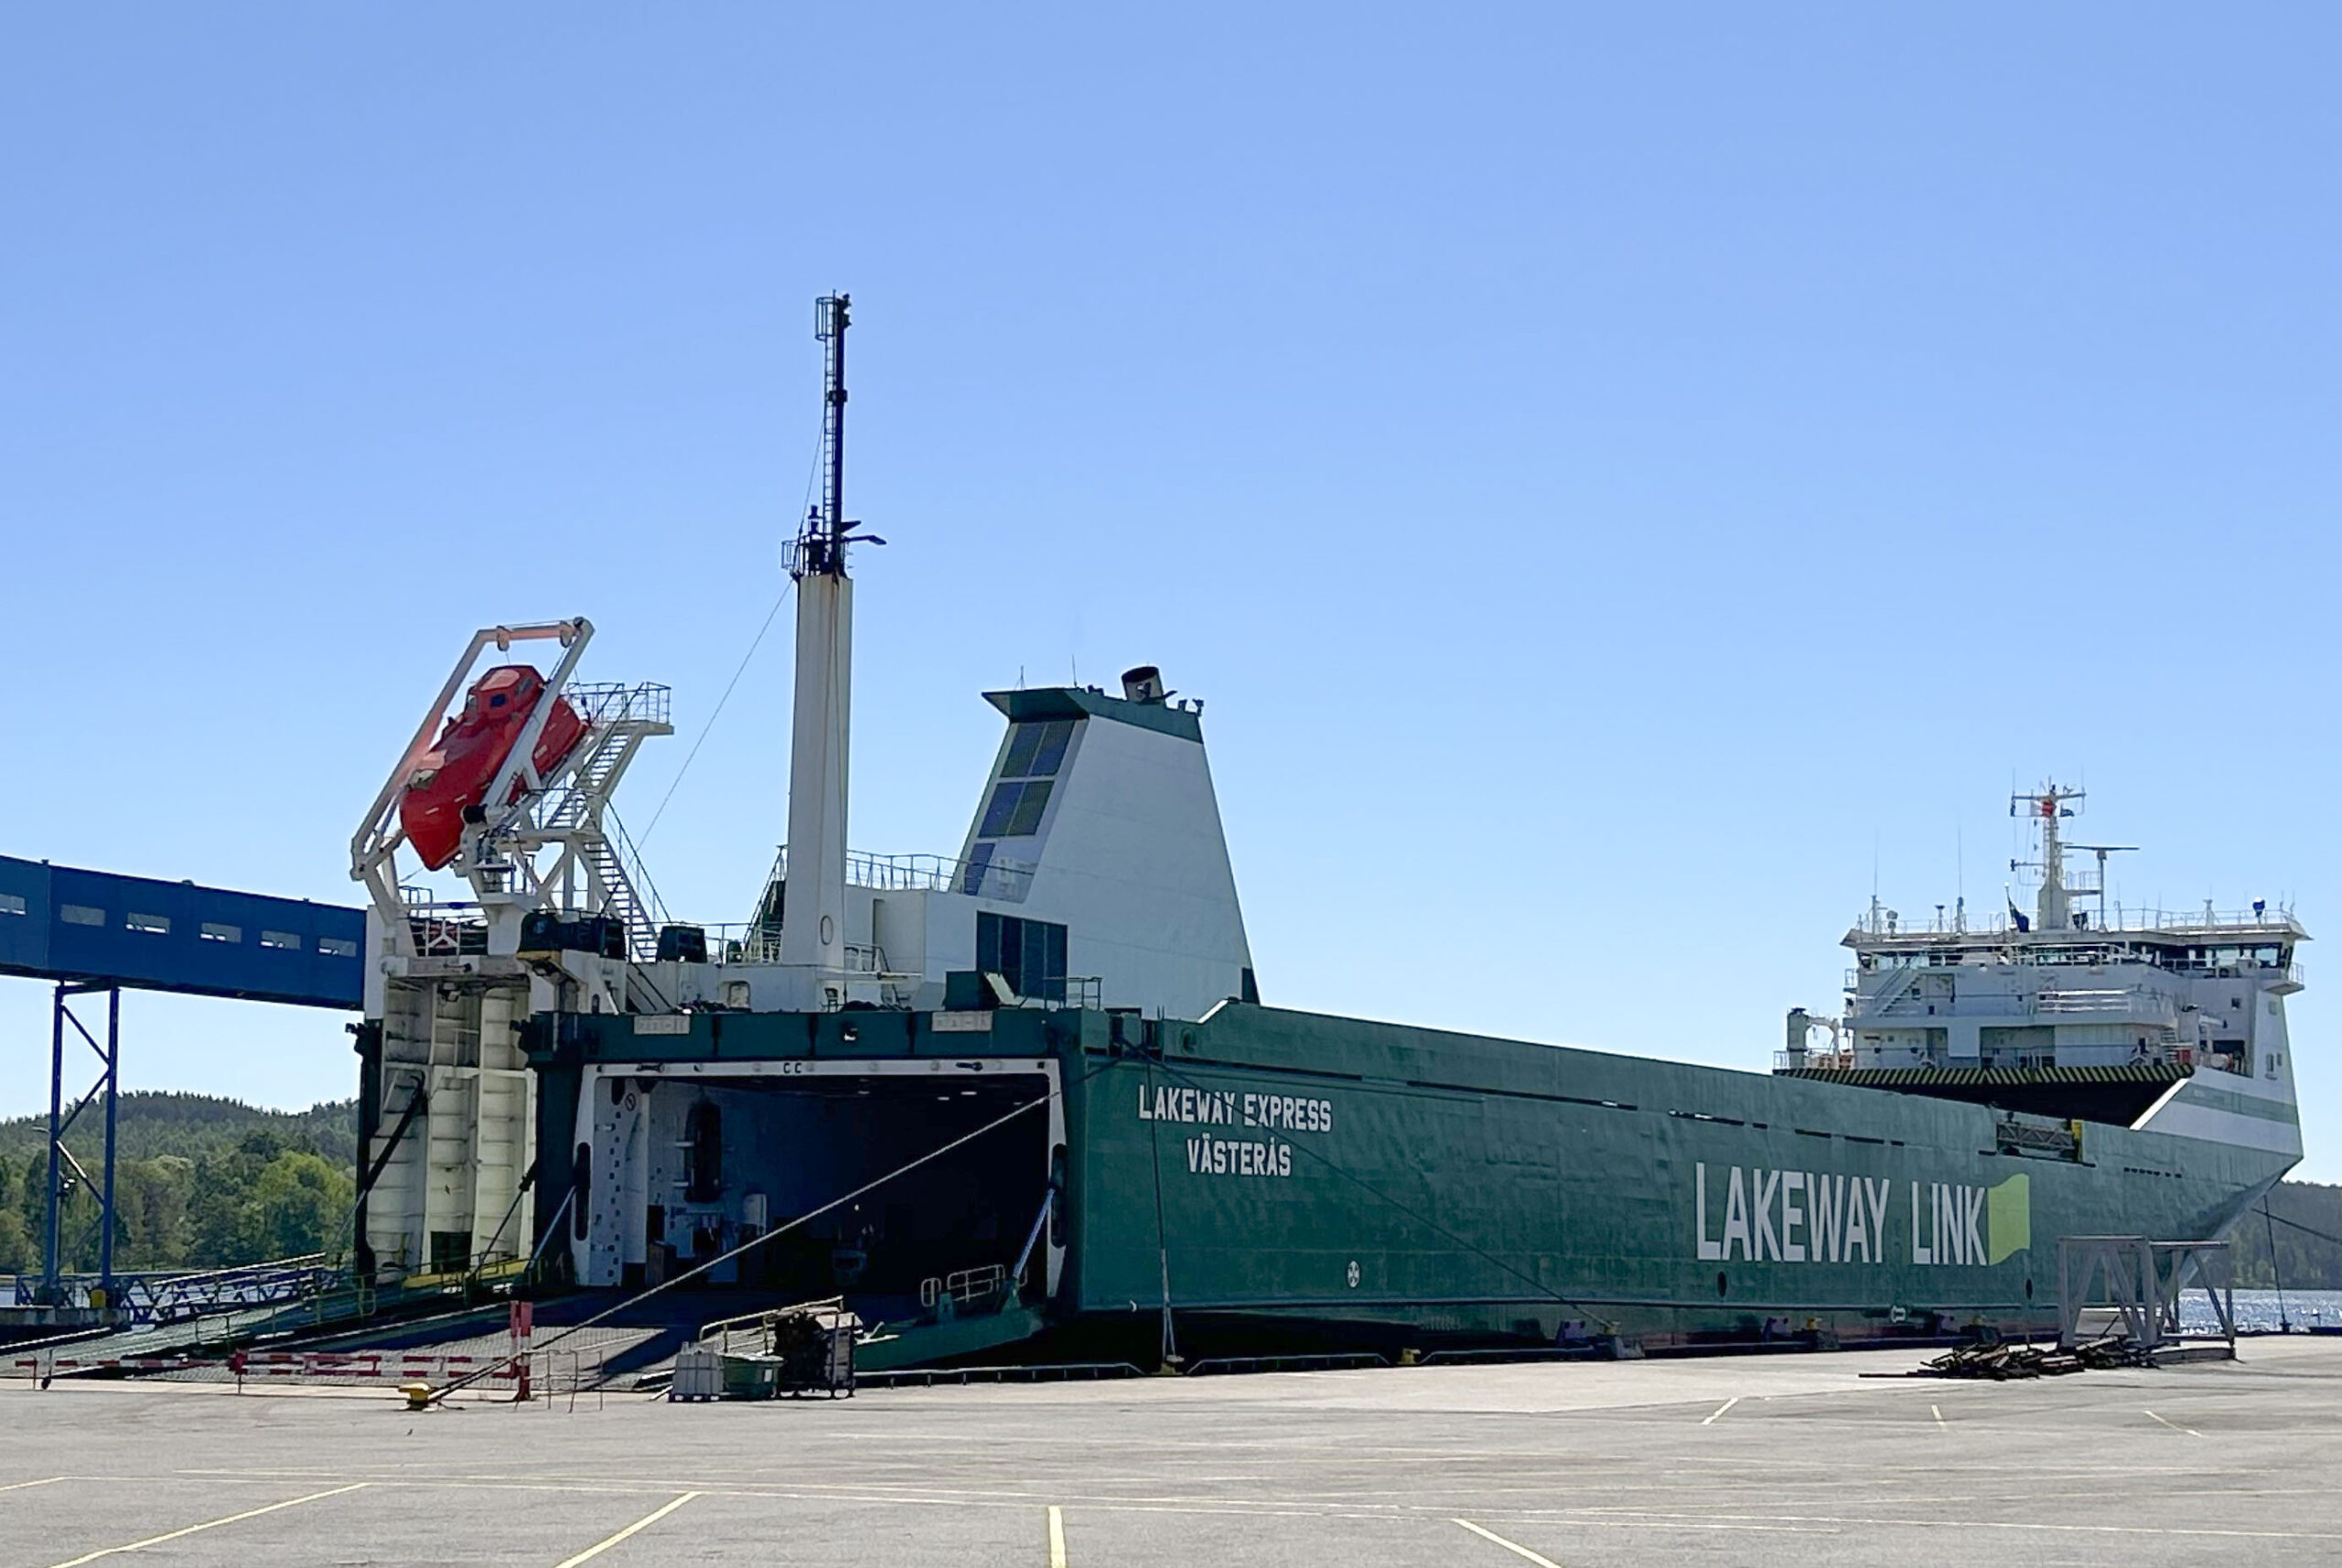 A large green and white cargo ship named "Lakeway Express Västerås" is docked at a port. The ship features the branding "Lakeway Link" prominently on its side. The ship has a red lifeboat mounted on its upper deck, and its ramp is lowered, indicating it might be in the process of loading or unloading cargo. The sky is clear and blue, and there are trees and hills visible in the background, suggesting a calm and pleasant day at the port. The ground around the dock is empty, with a few scattered objects and equipment.